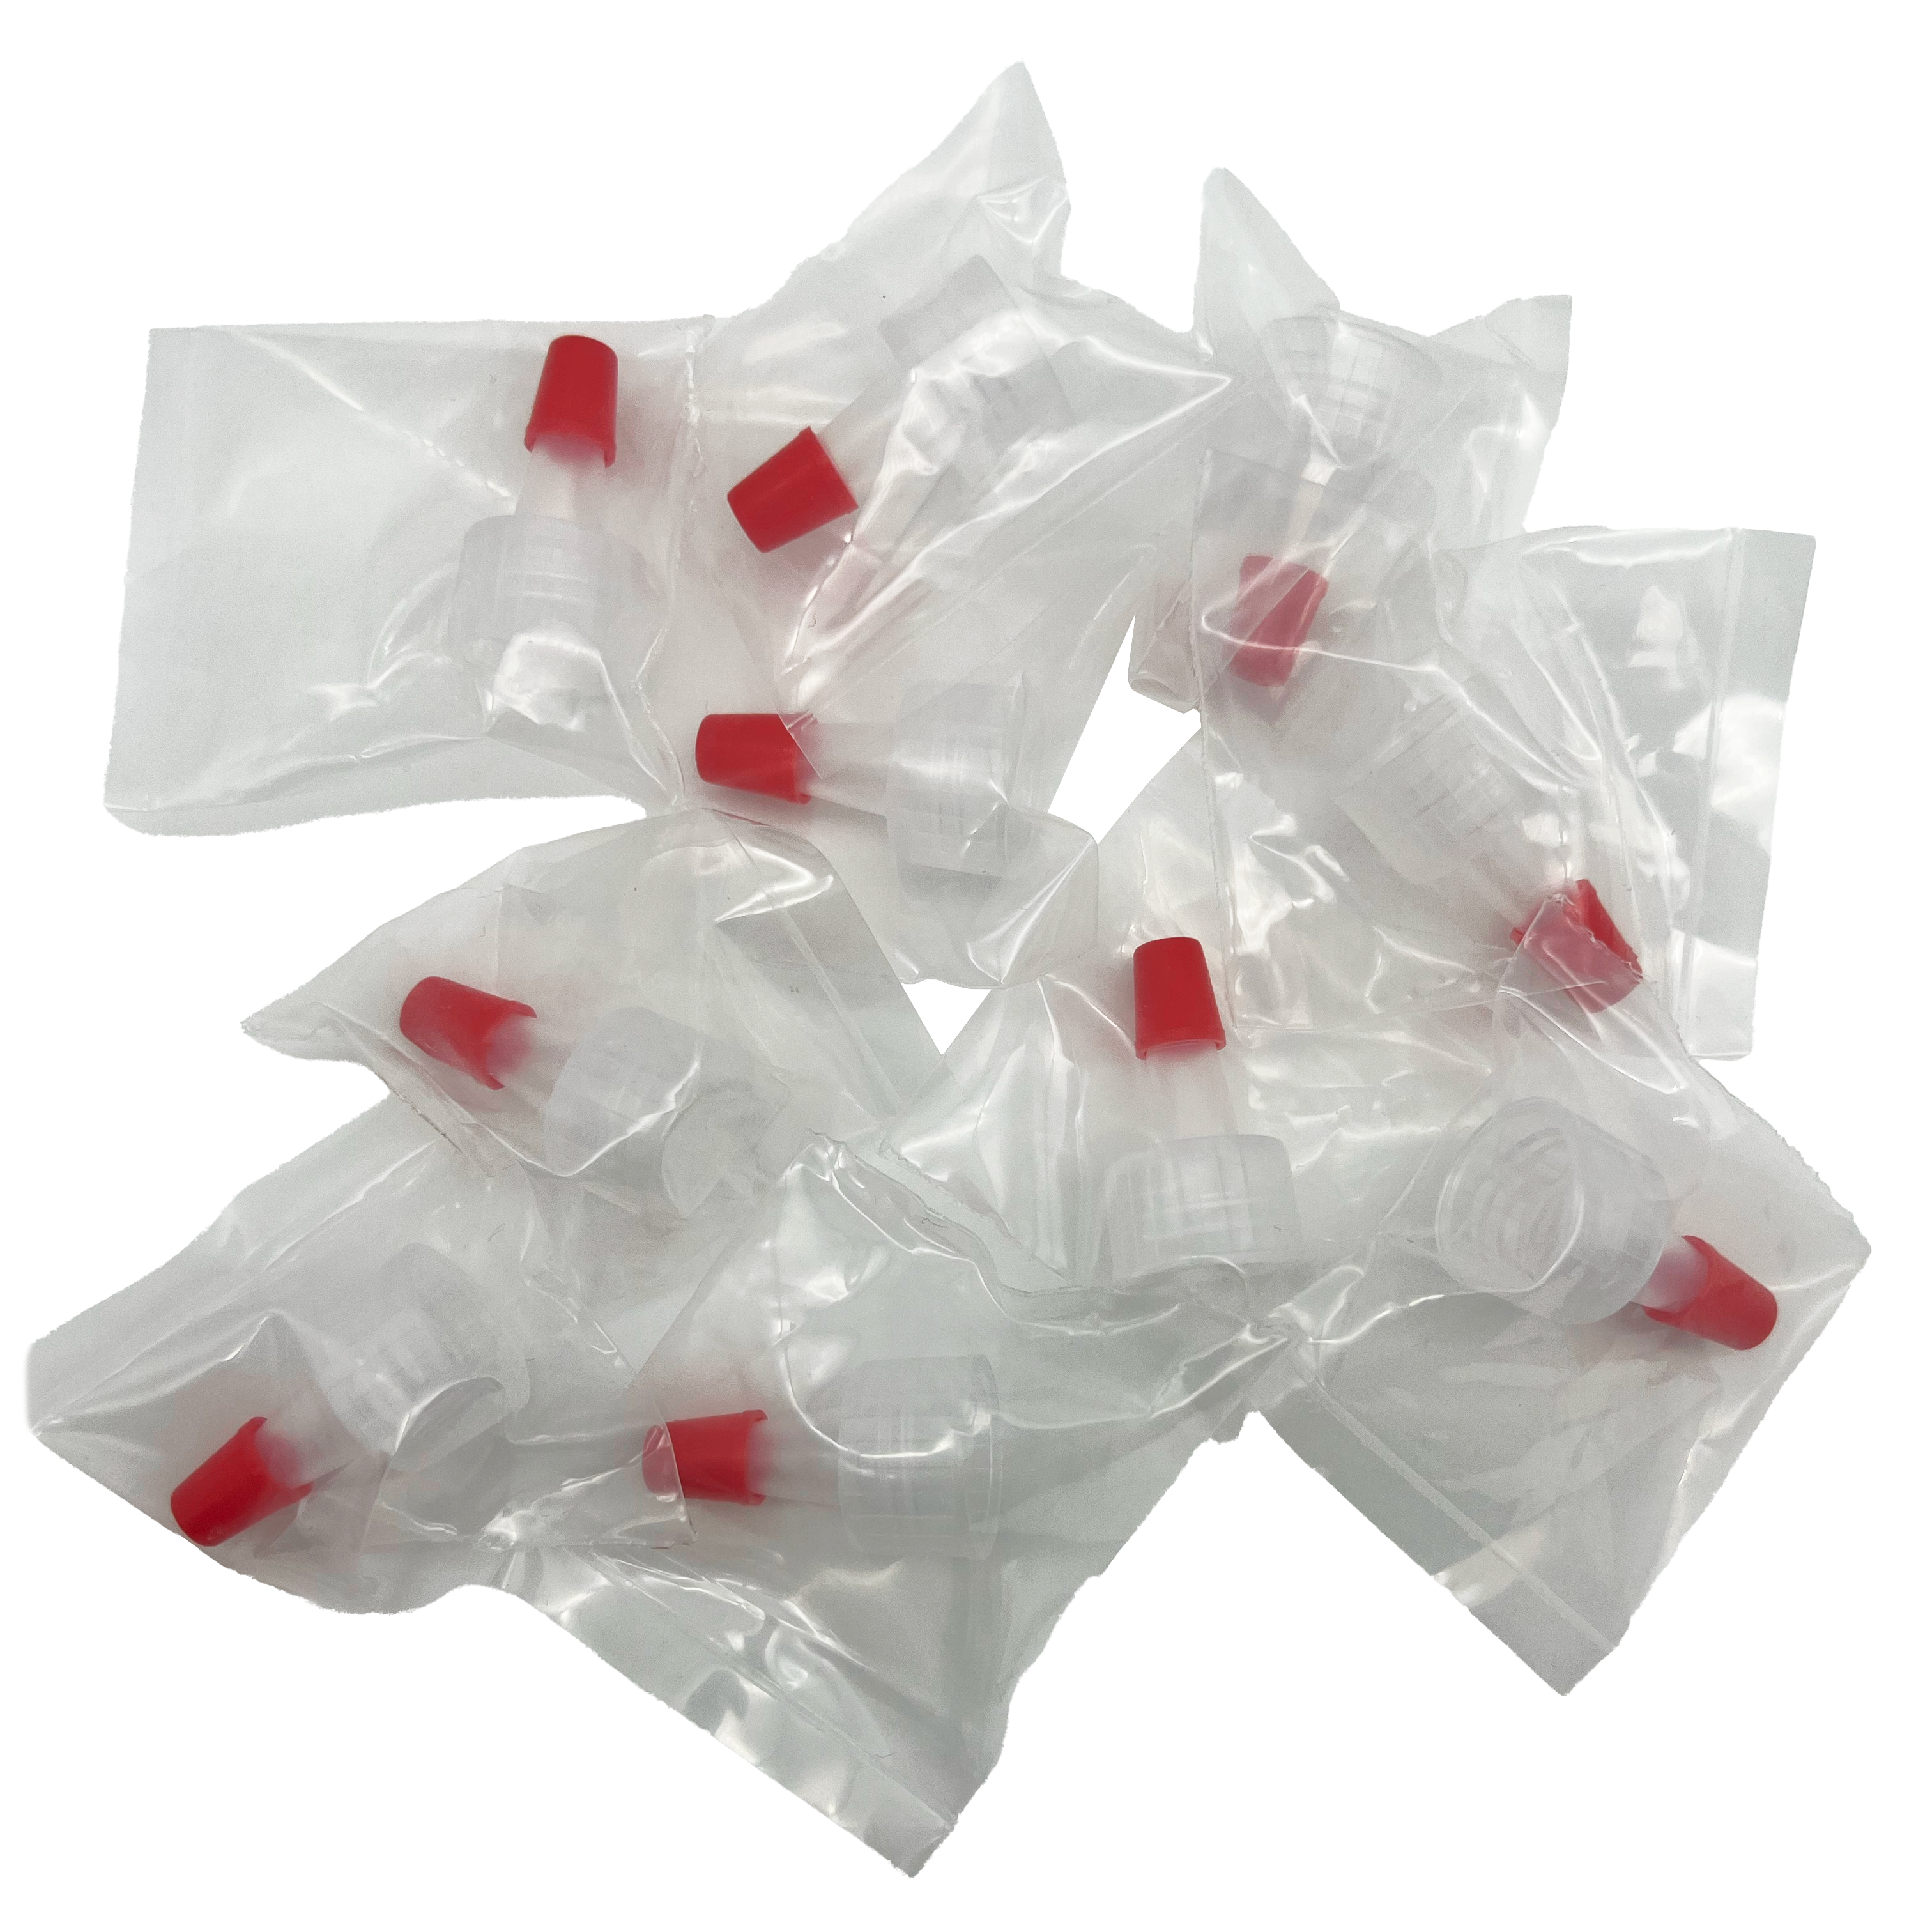 Disposable Micro Q-Tips 100 pcs Micro-brushes - GirlzInk Store